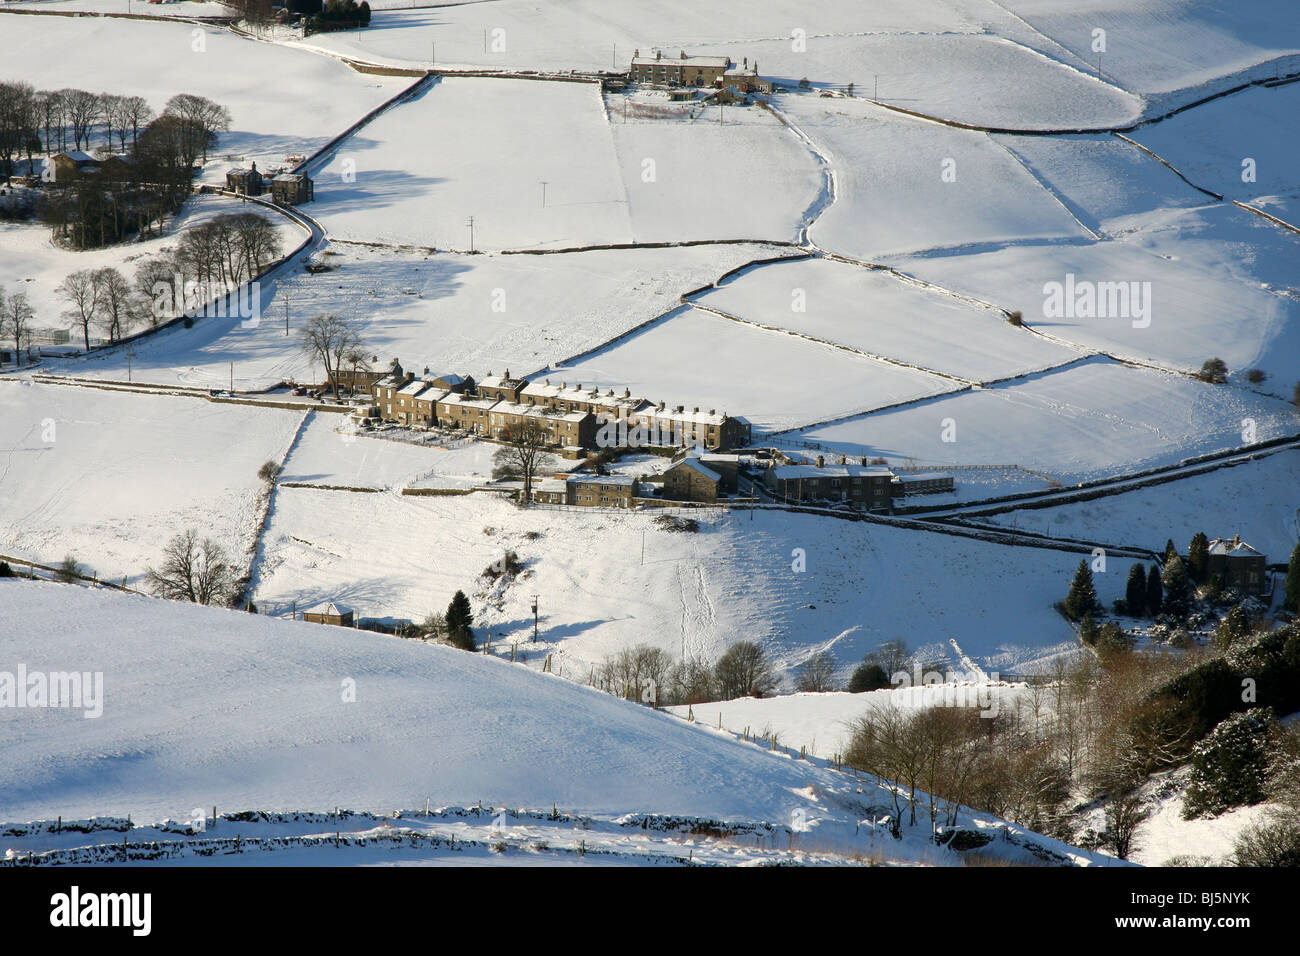 Hamlet of Booth in the Luddenden Valley, Calderdale, under winter snow Stock Photo